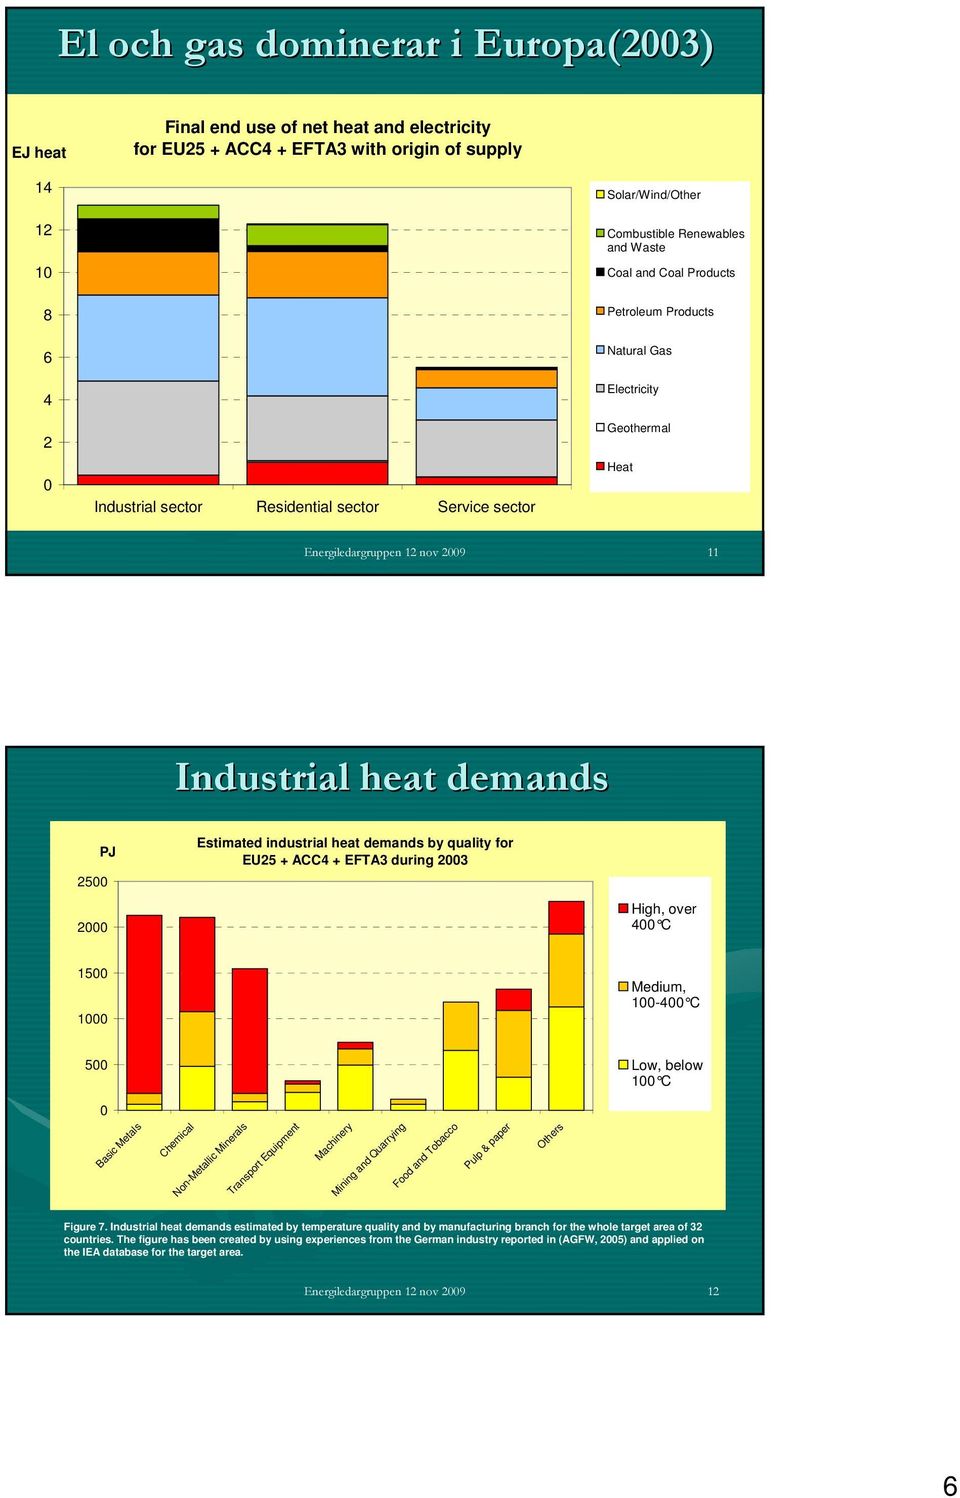 Estimated industrial heat demands by quality for EU25 + ACC4 + EFTA3 during 23 2 High, over 4 C 15 1 Medium, 1-4 C 5 Low, below 1 C Basic Metals Chemical Non-Metallic Minerals Transport Equipment